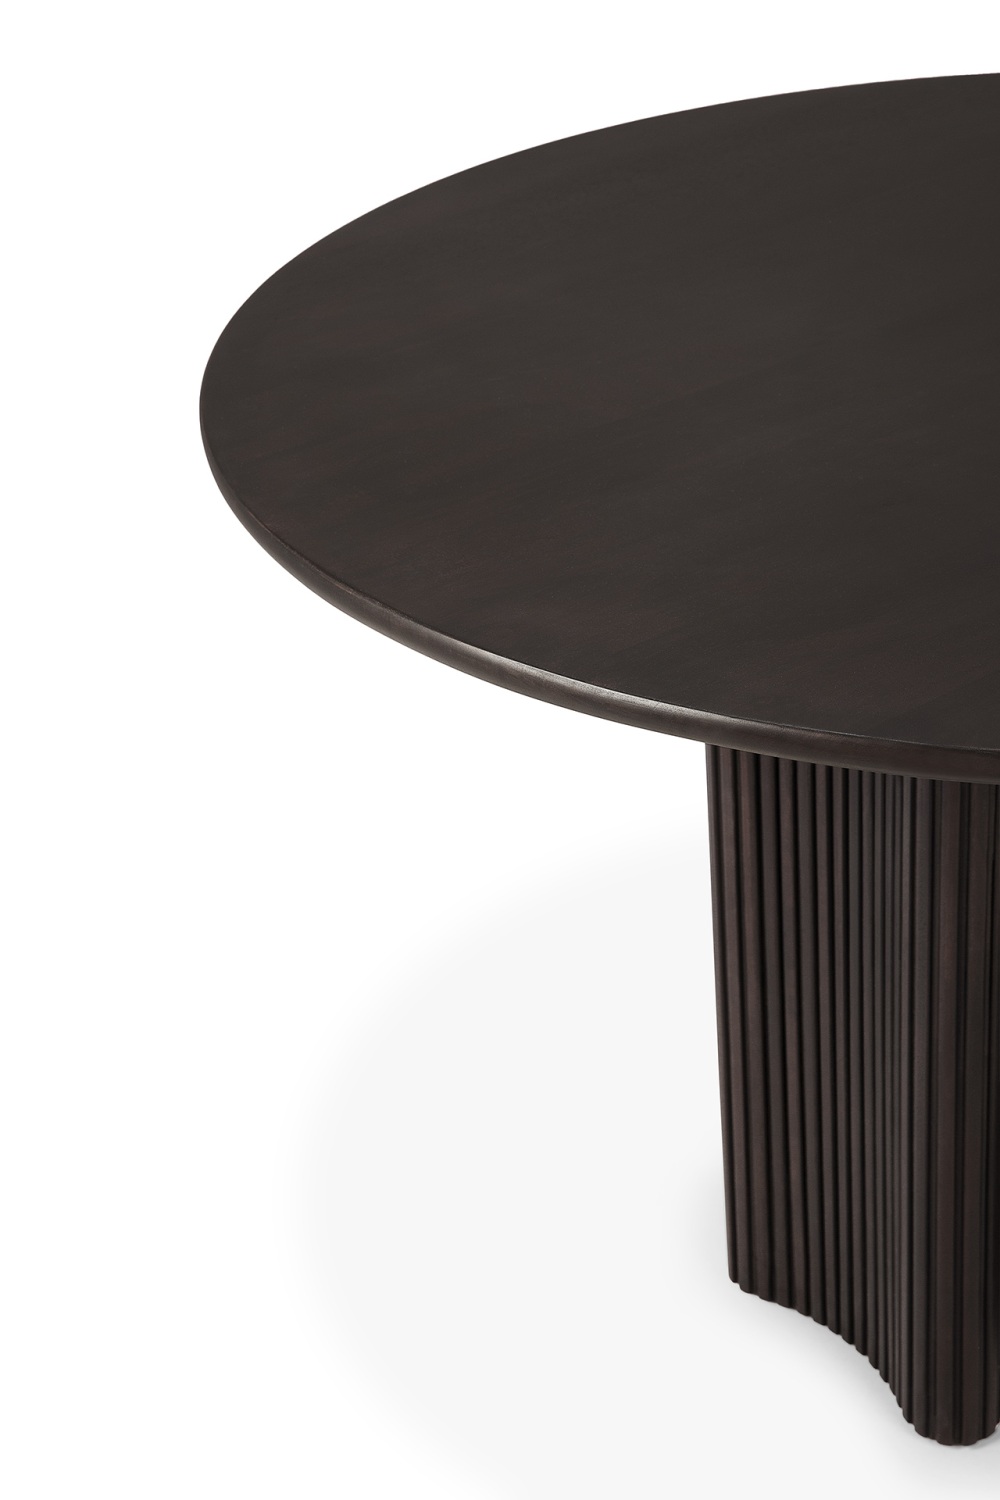 Brown Mahogany Dining Table | Ethnicraft Roller Max | Oroa.com